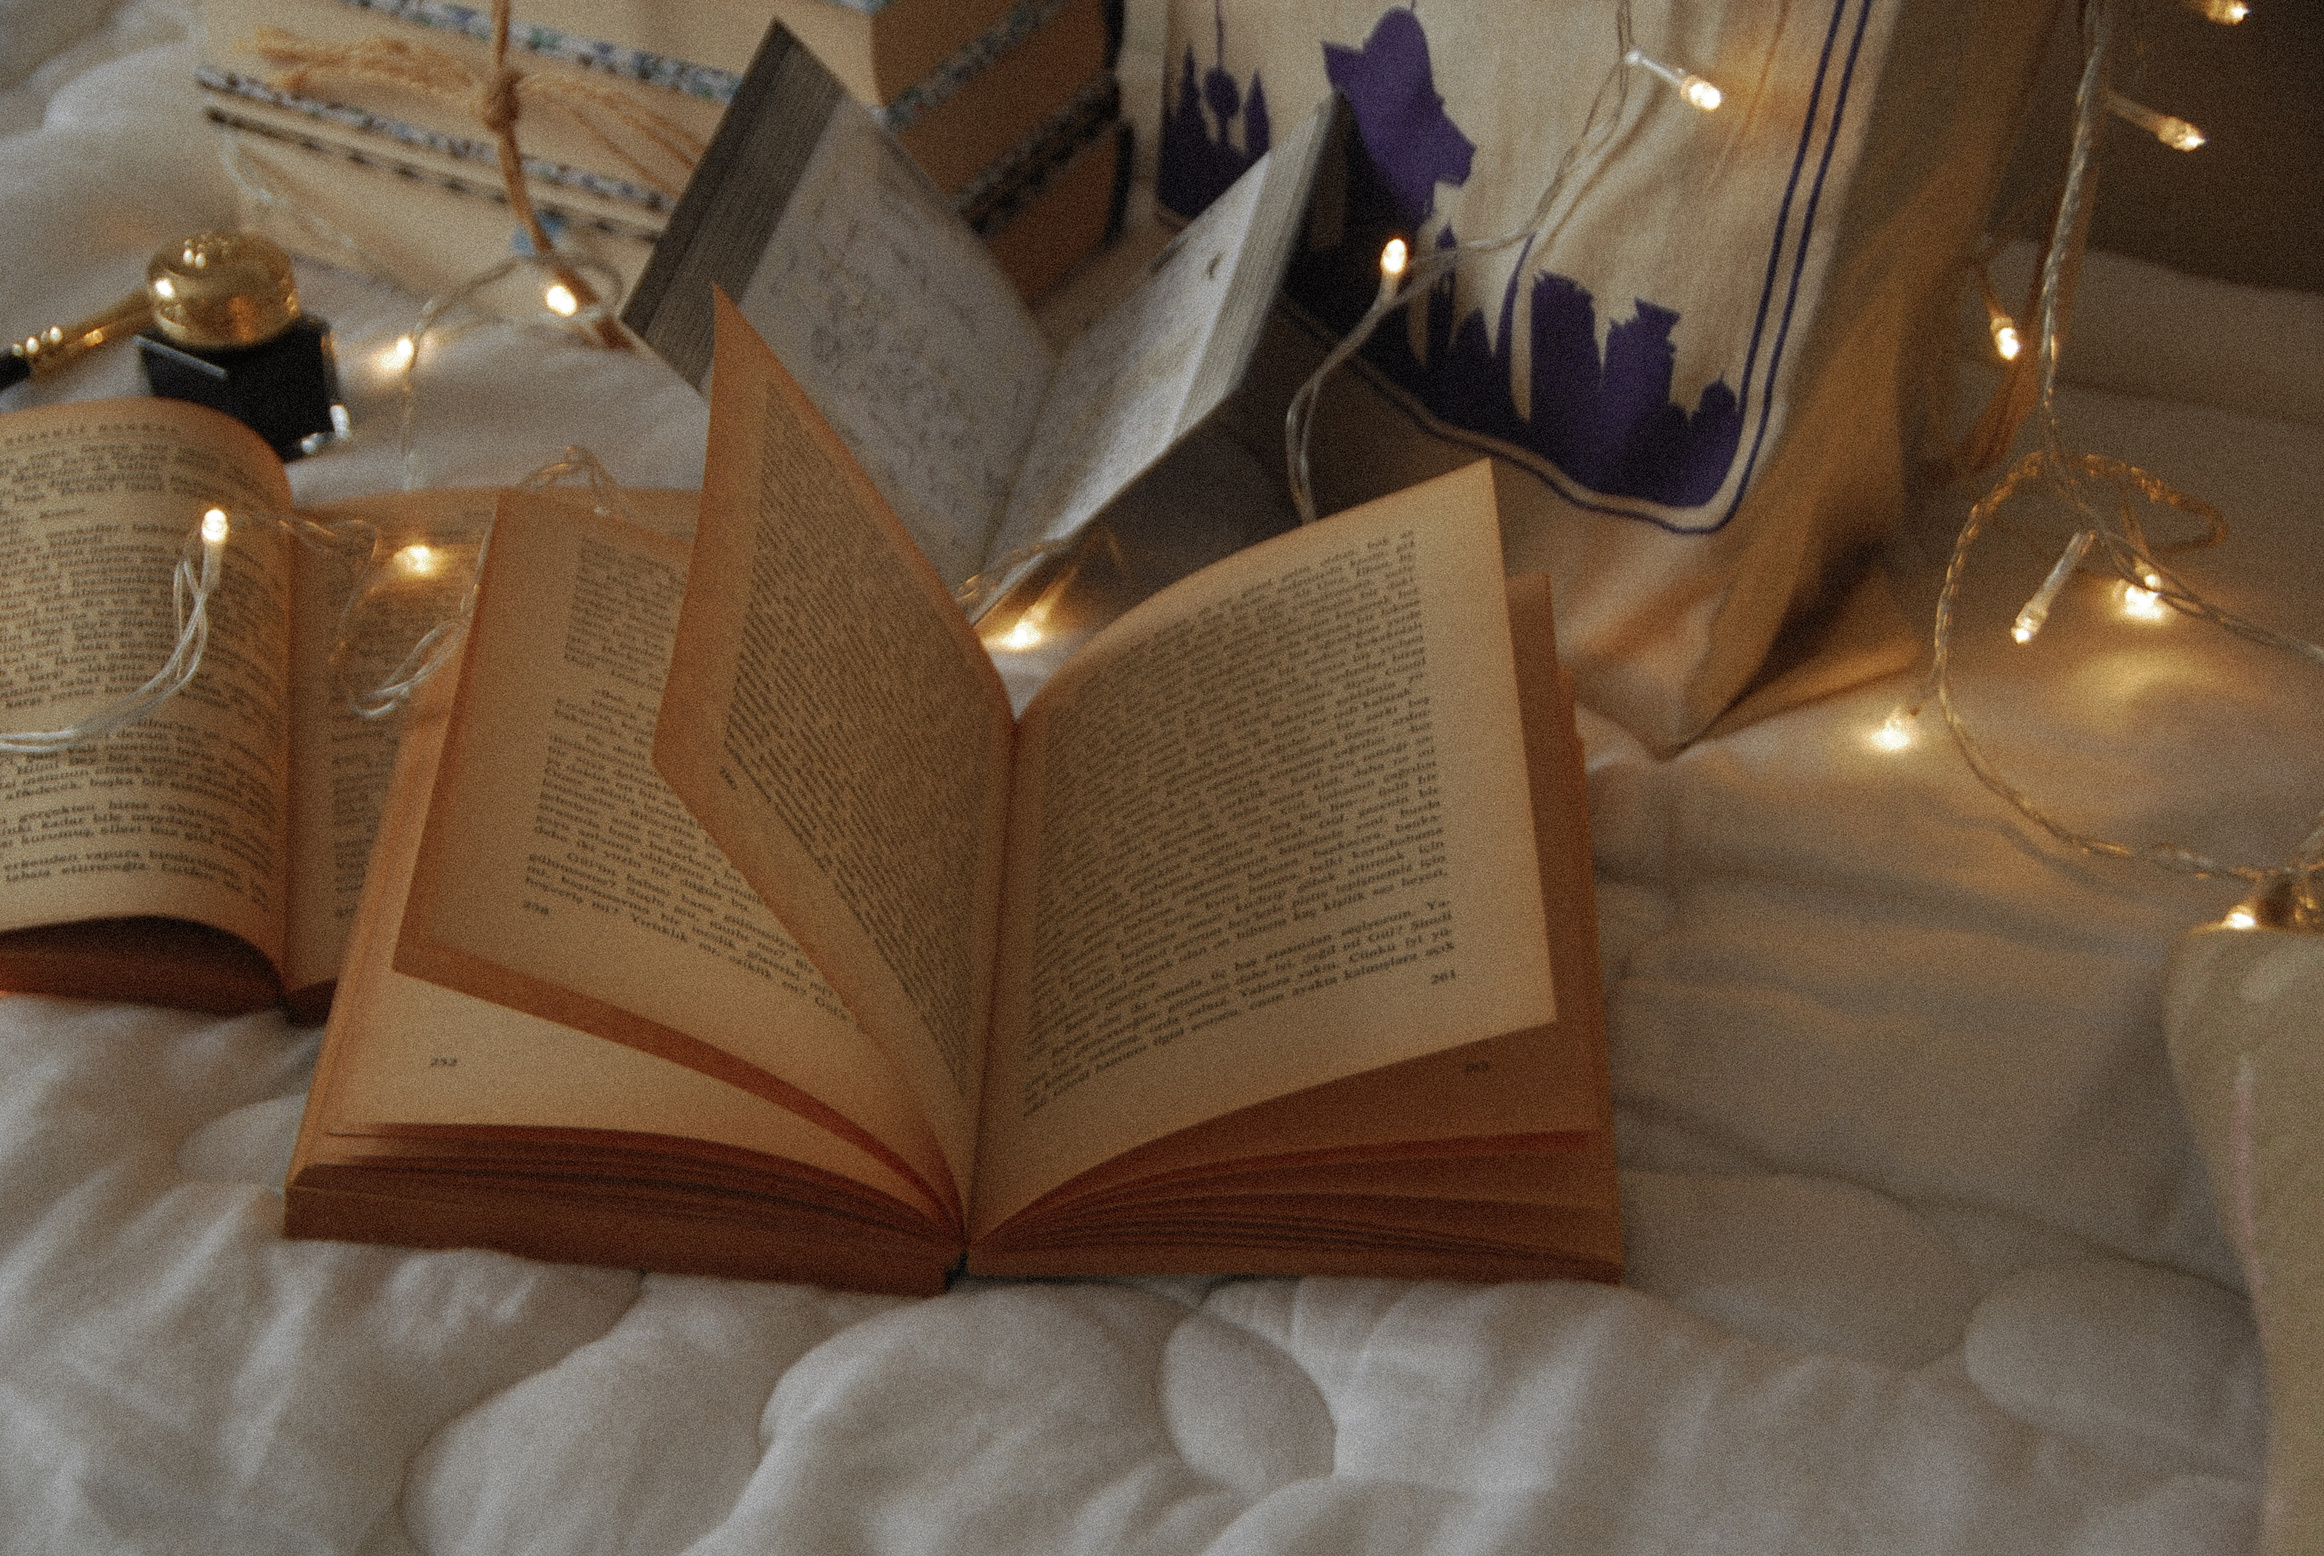 Open Books on a Bed